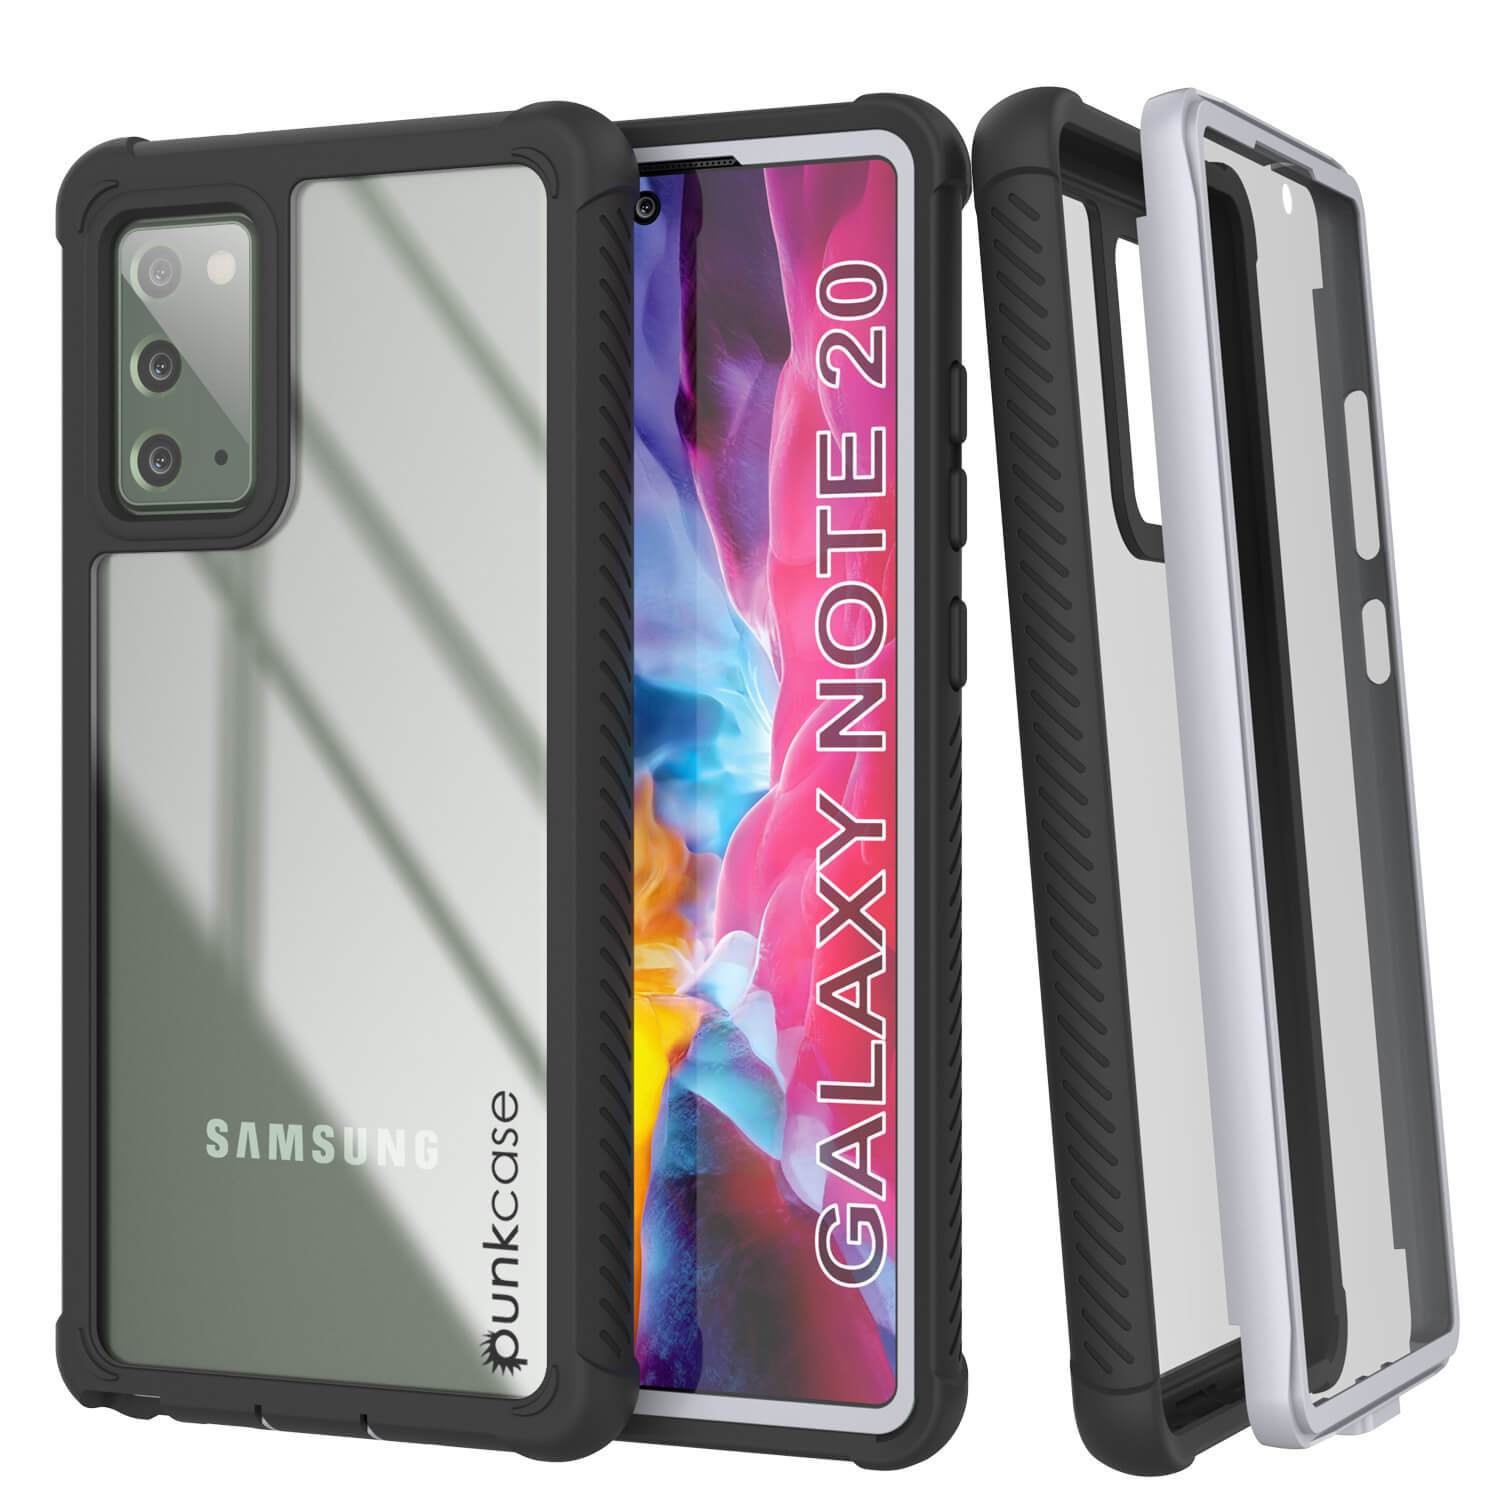 Punkcase Galaxy Note 20 Case, [Spartan Series] White Rugged Heavy Duty Cover W/Built in Screen Protector